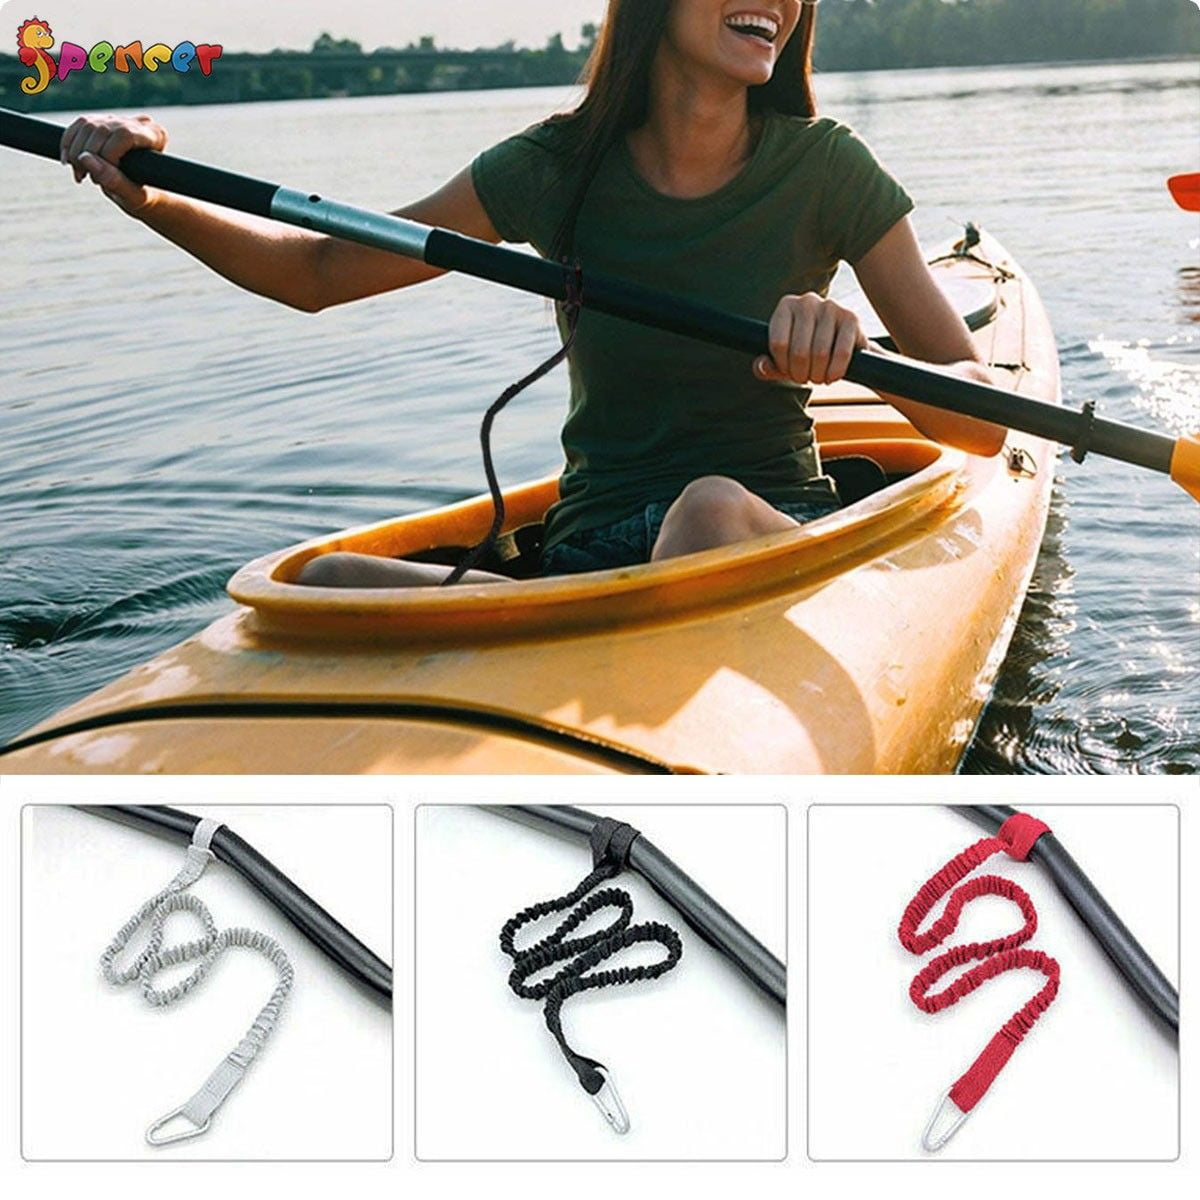 2 x Red Nylon Paddle Clips Fishing Rod Holder Keeper Canoe Kayak Accessories 